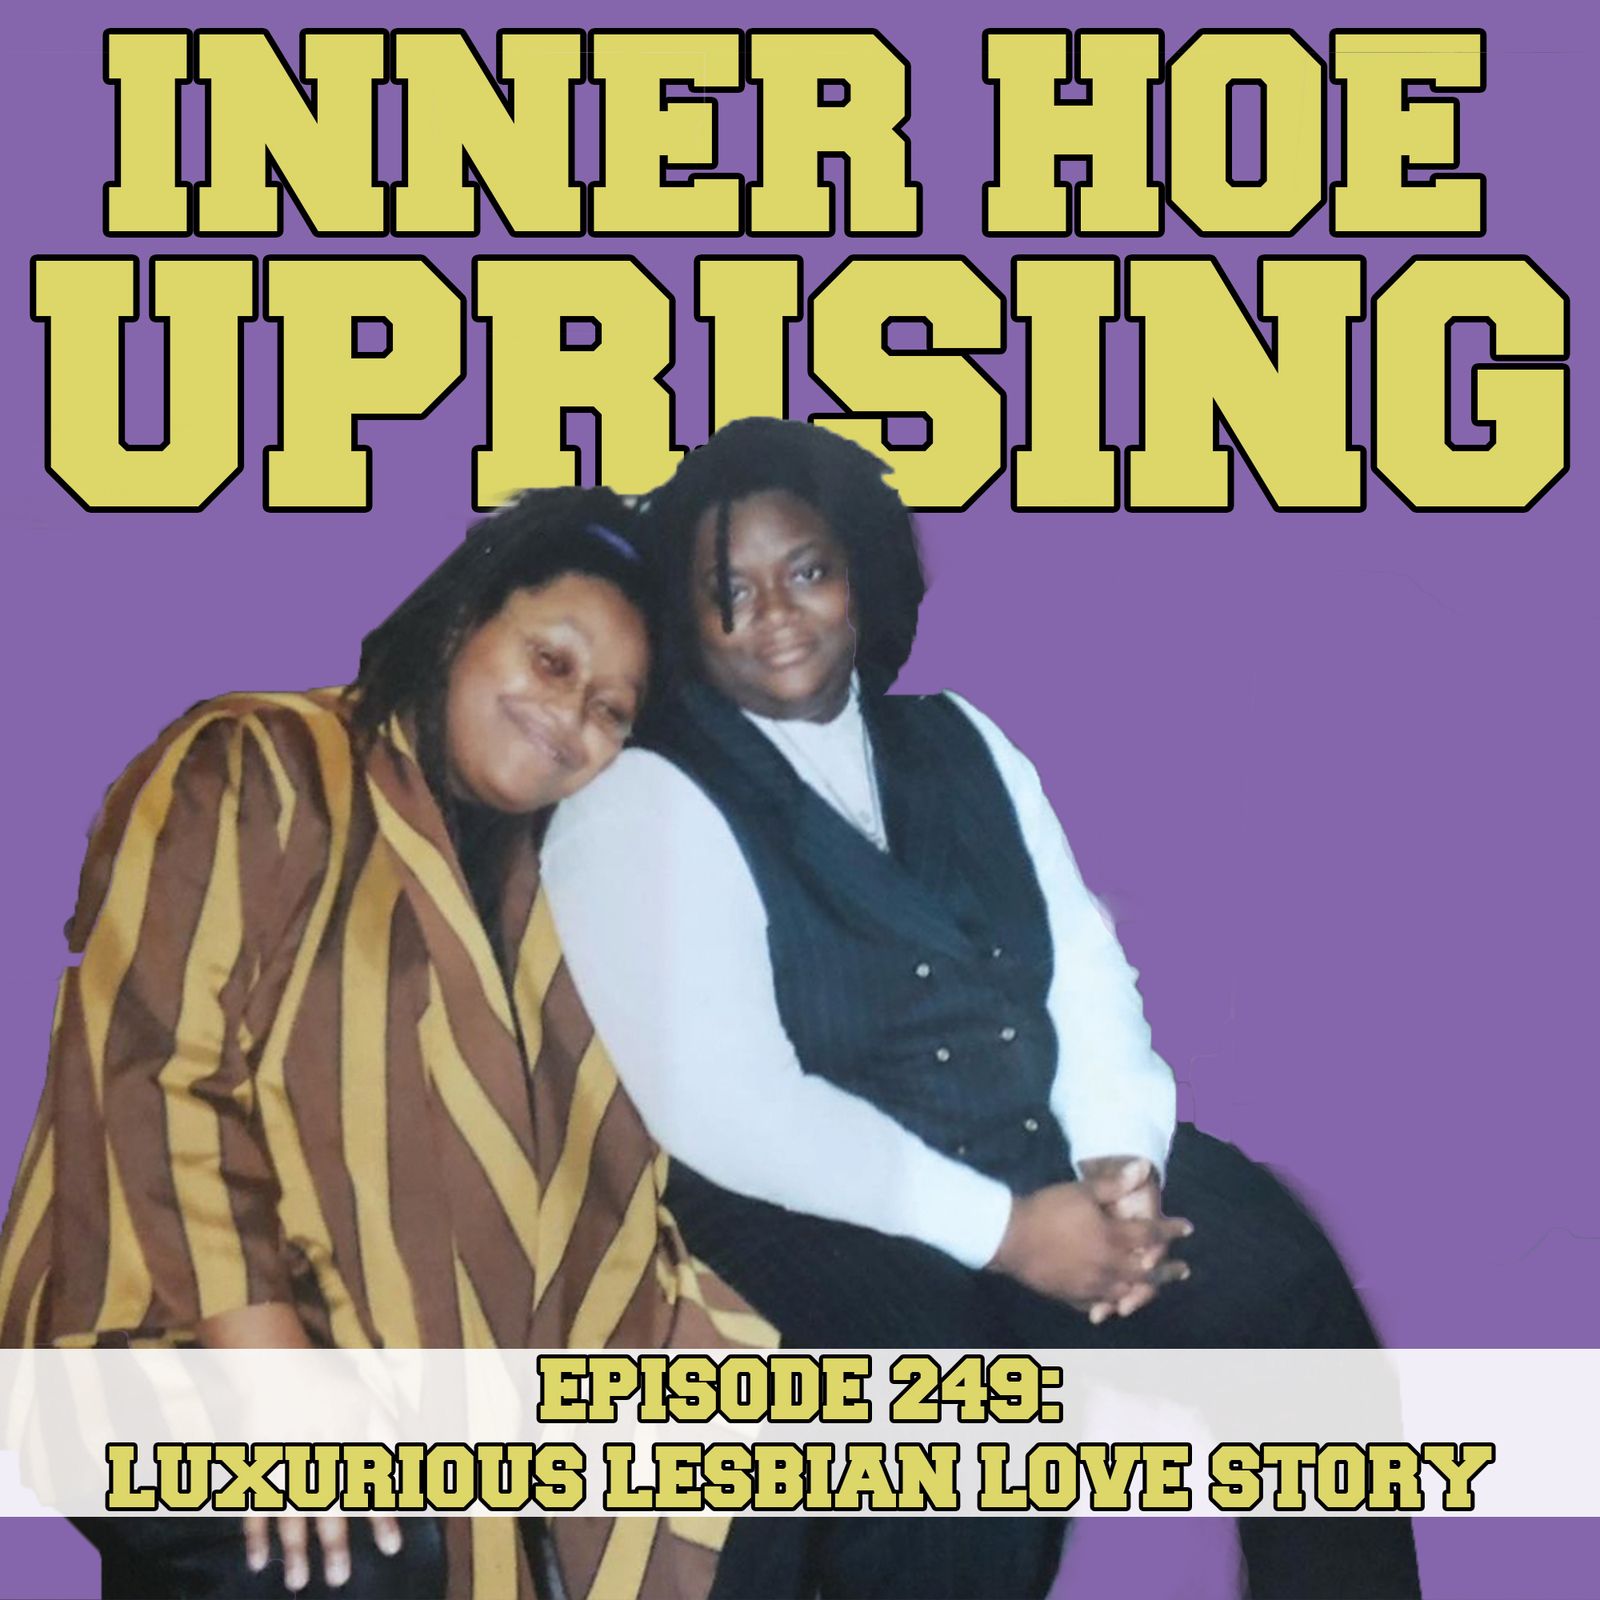 Thumbnail for "S8 Ep6: A Luxurious Lesbian Love Story".